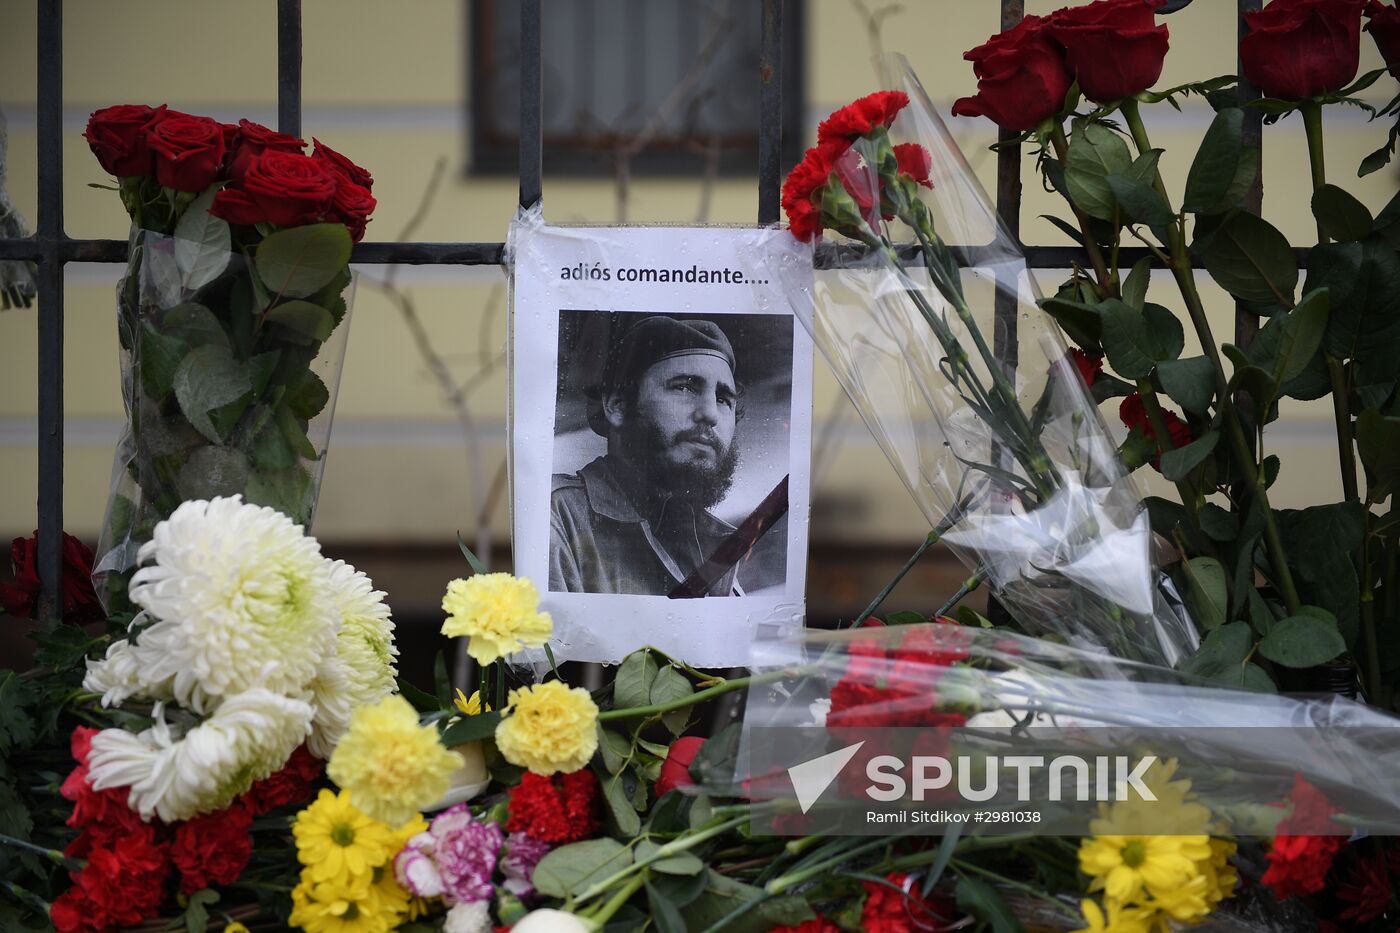 Moscow residents bring flowers to Cuban Embassy in memory of Fidel Castro